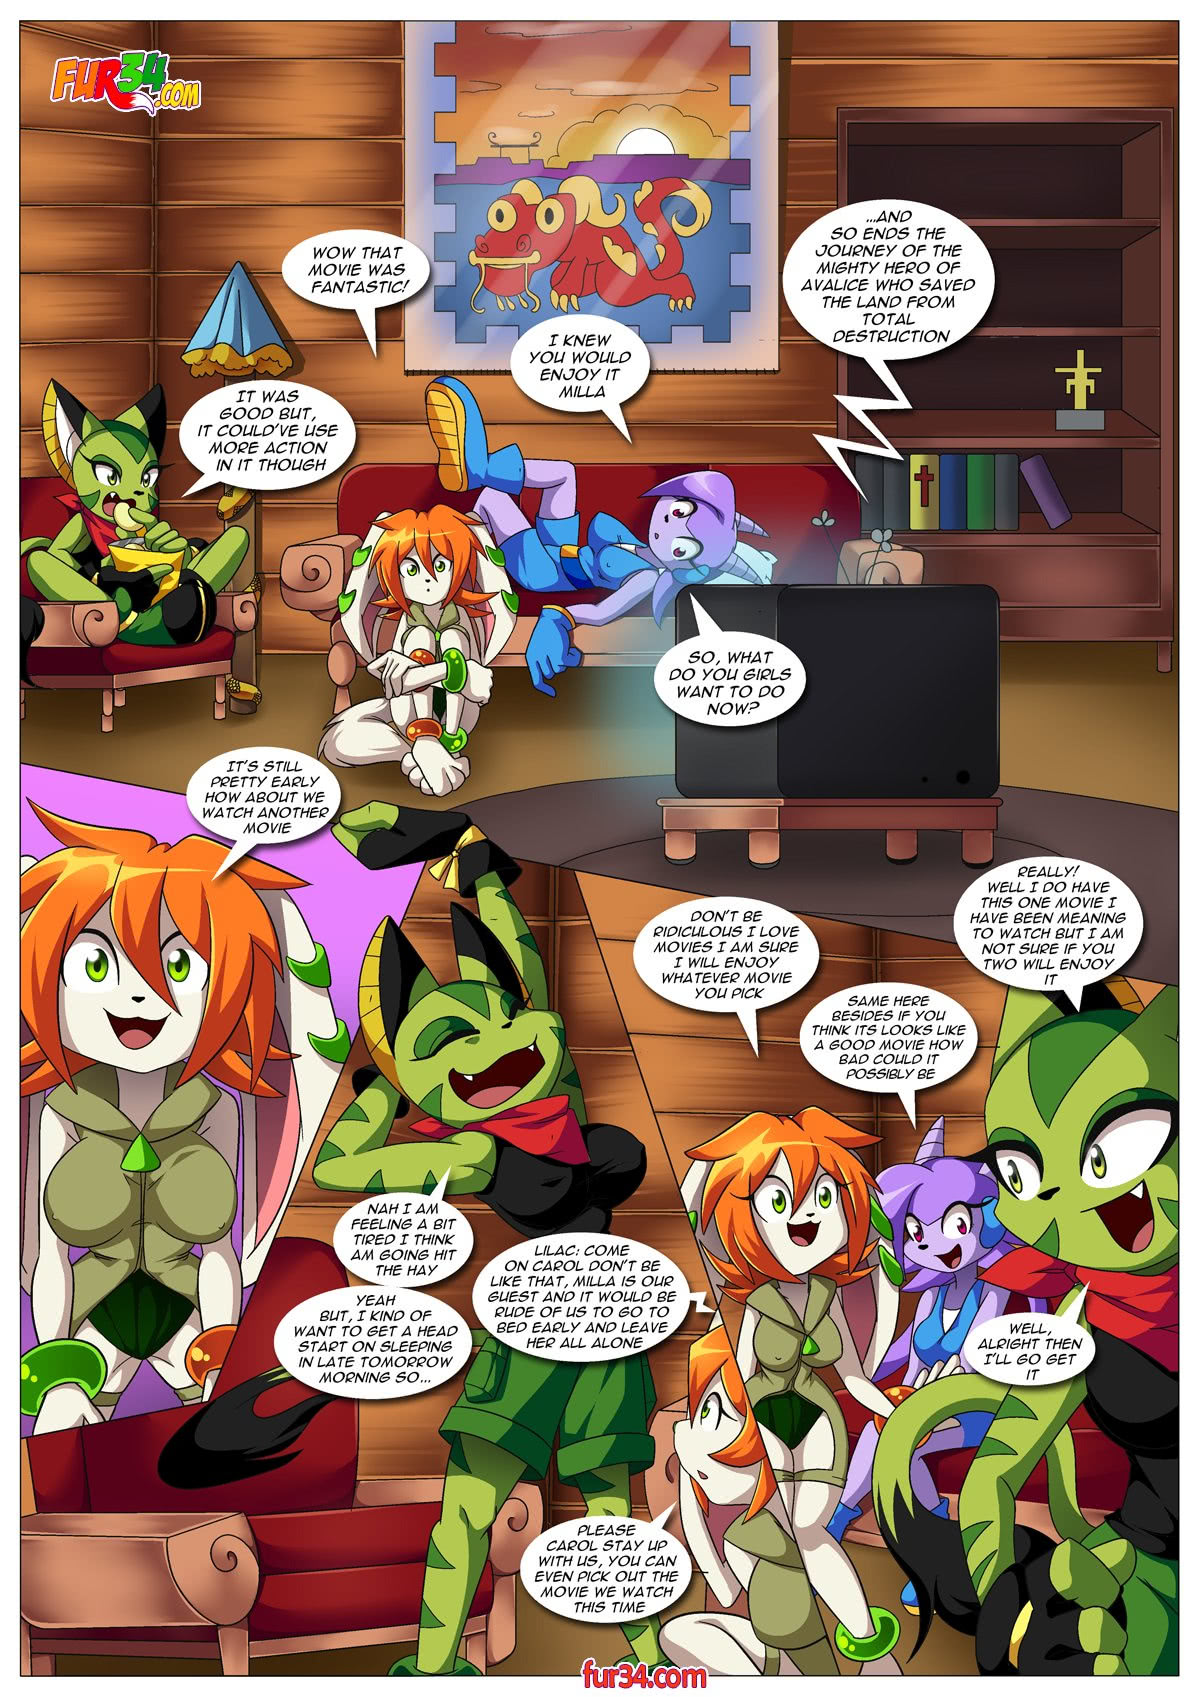 Watching A Movie With Friends - Page 2